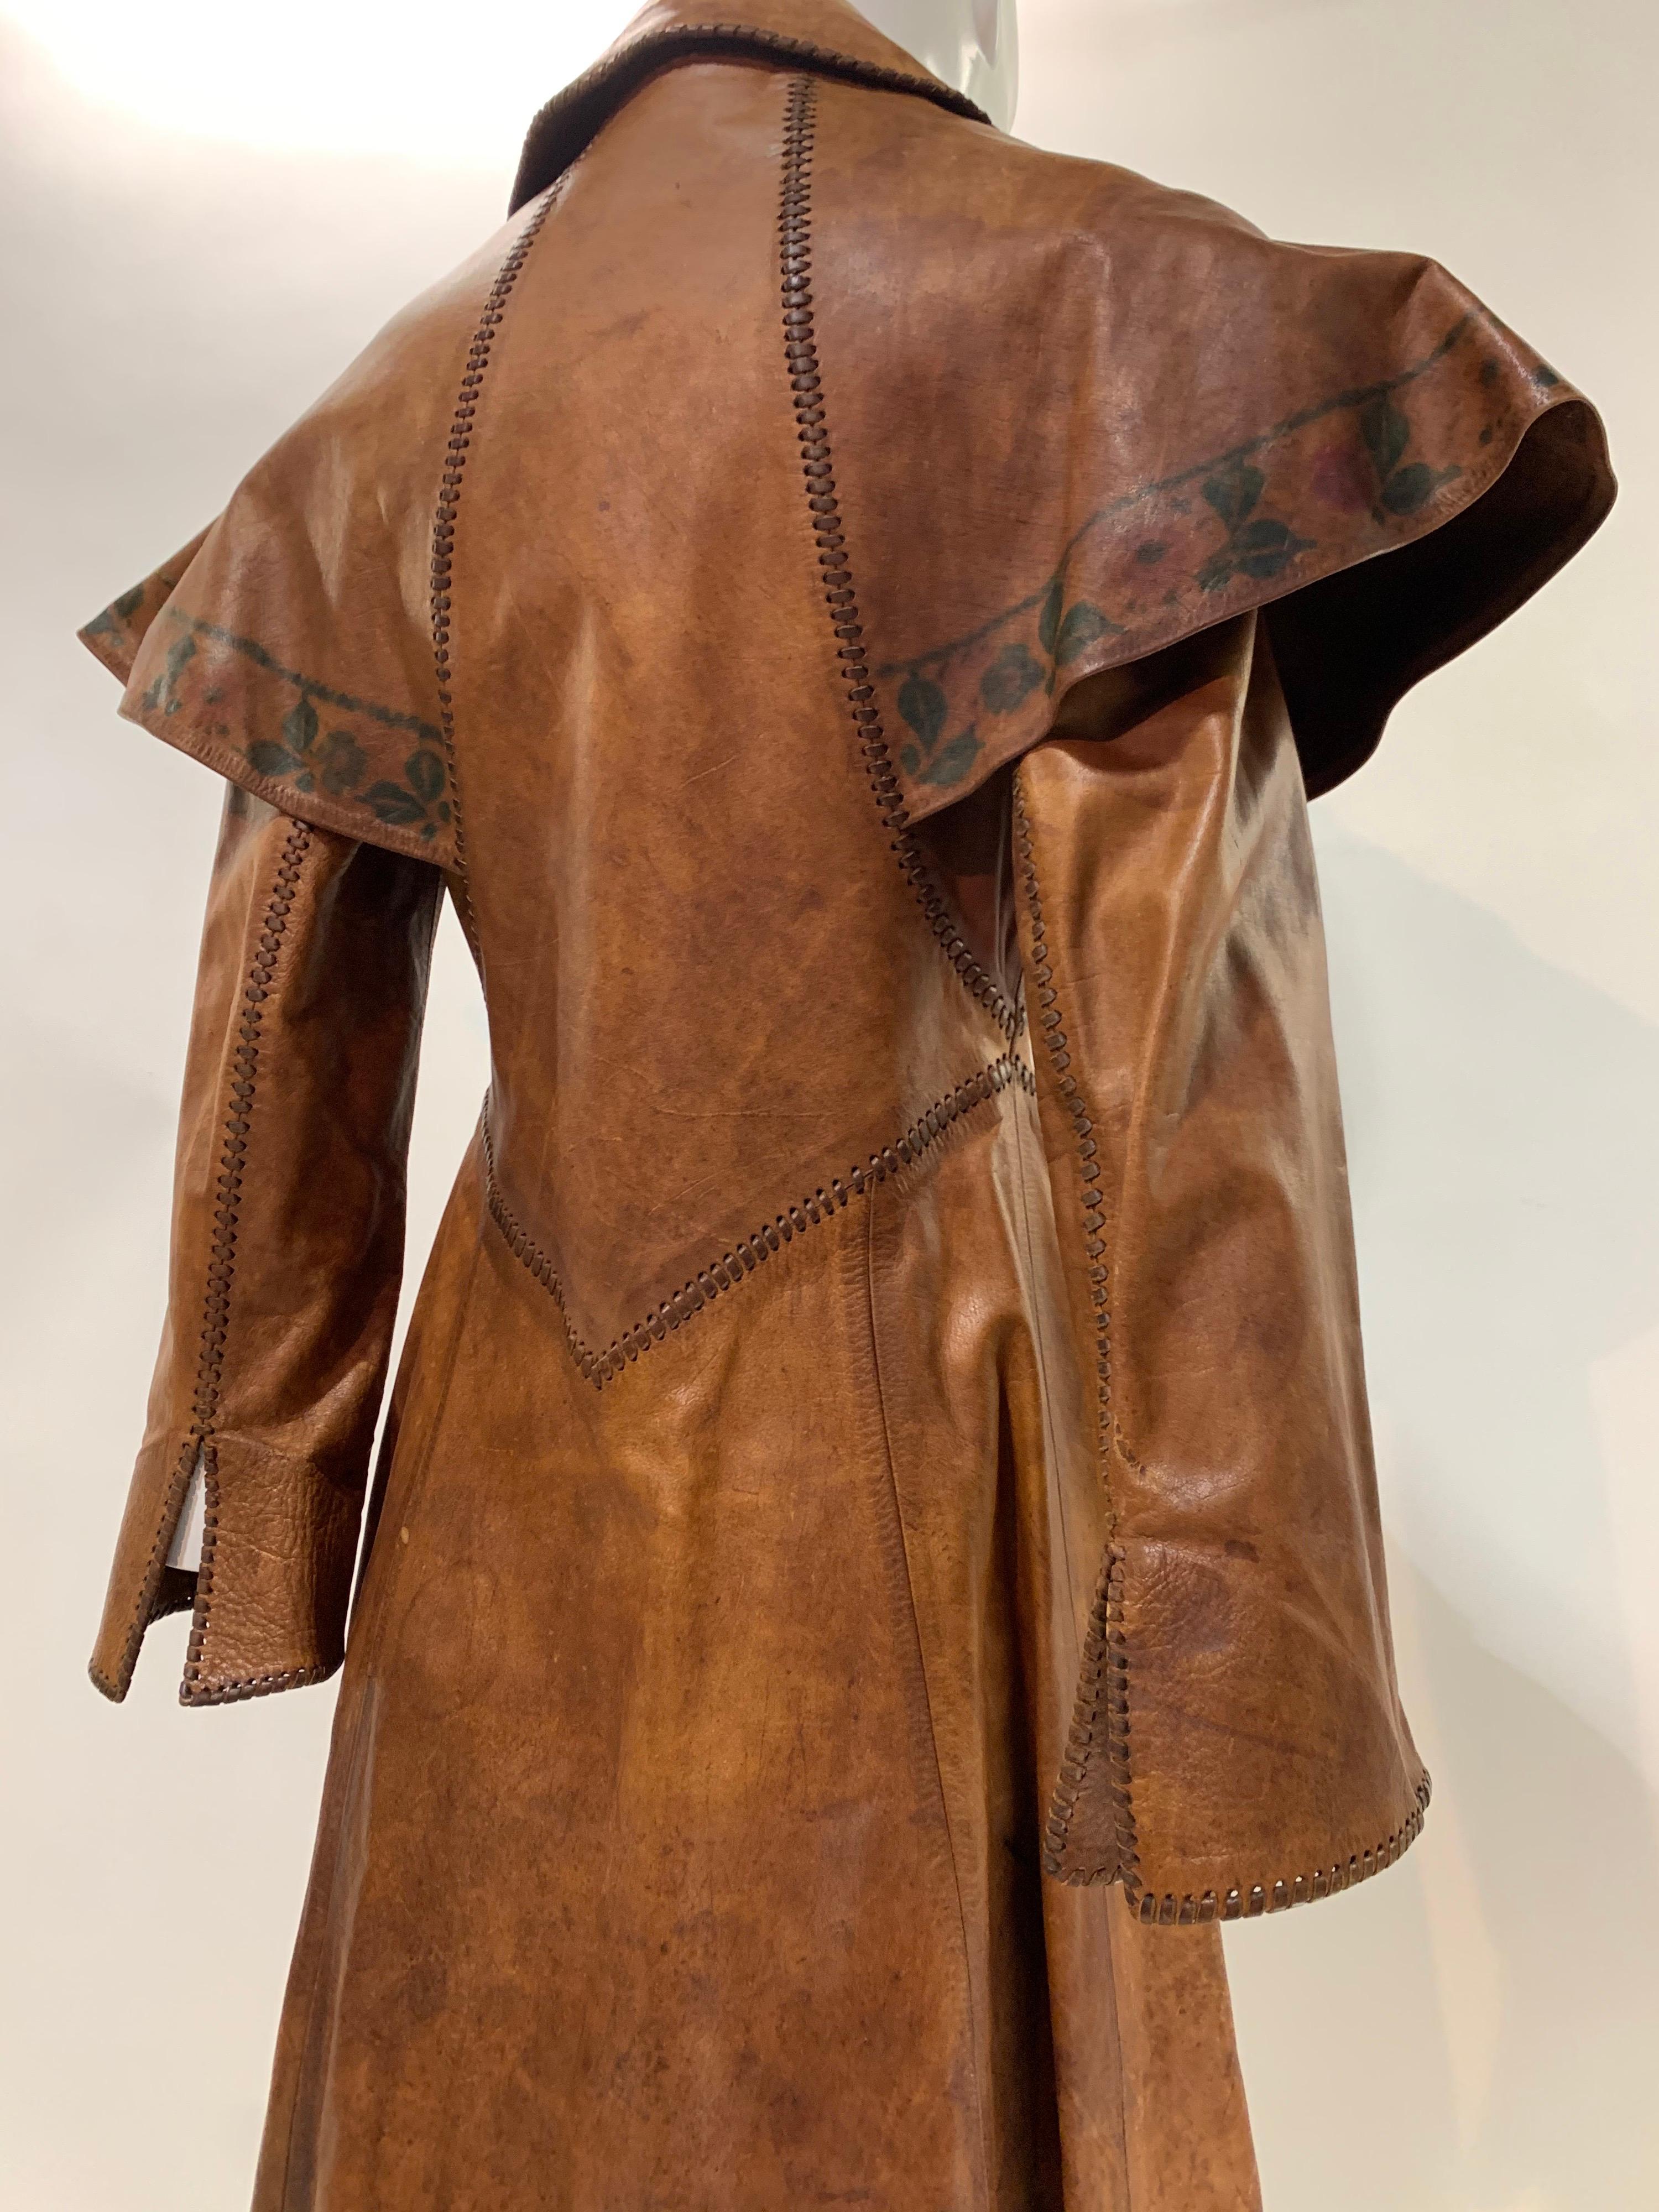 1970 Hand Made & Painted Distressed Leather Fairytale-Inspired Trench Coat  For Sale 2